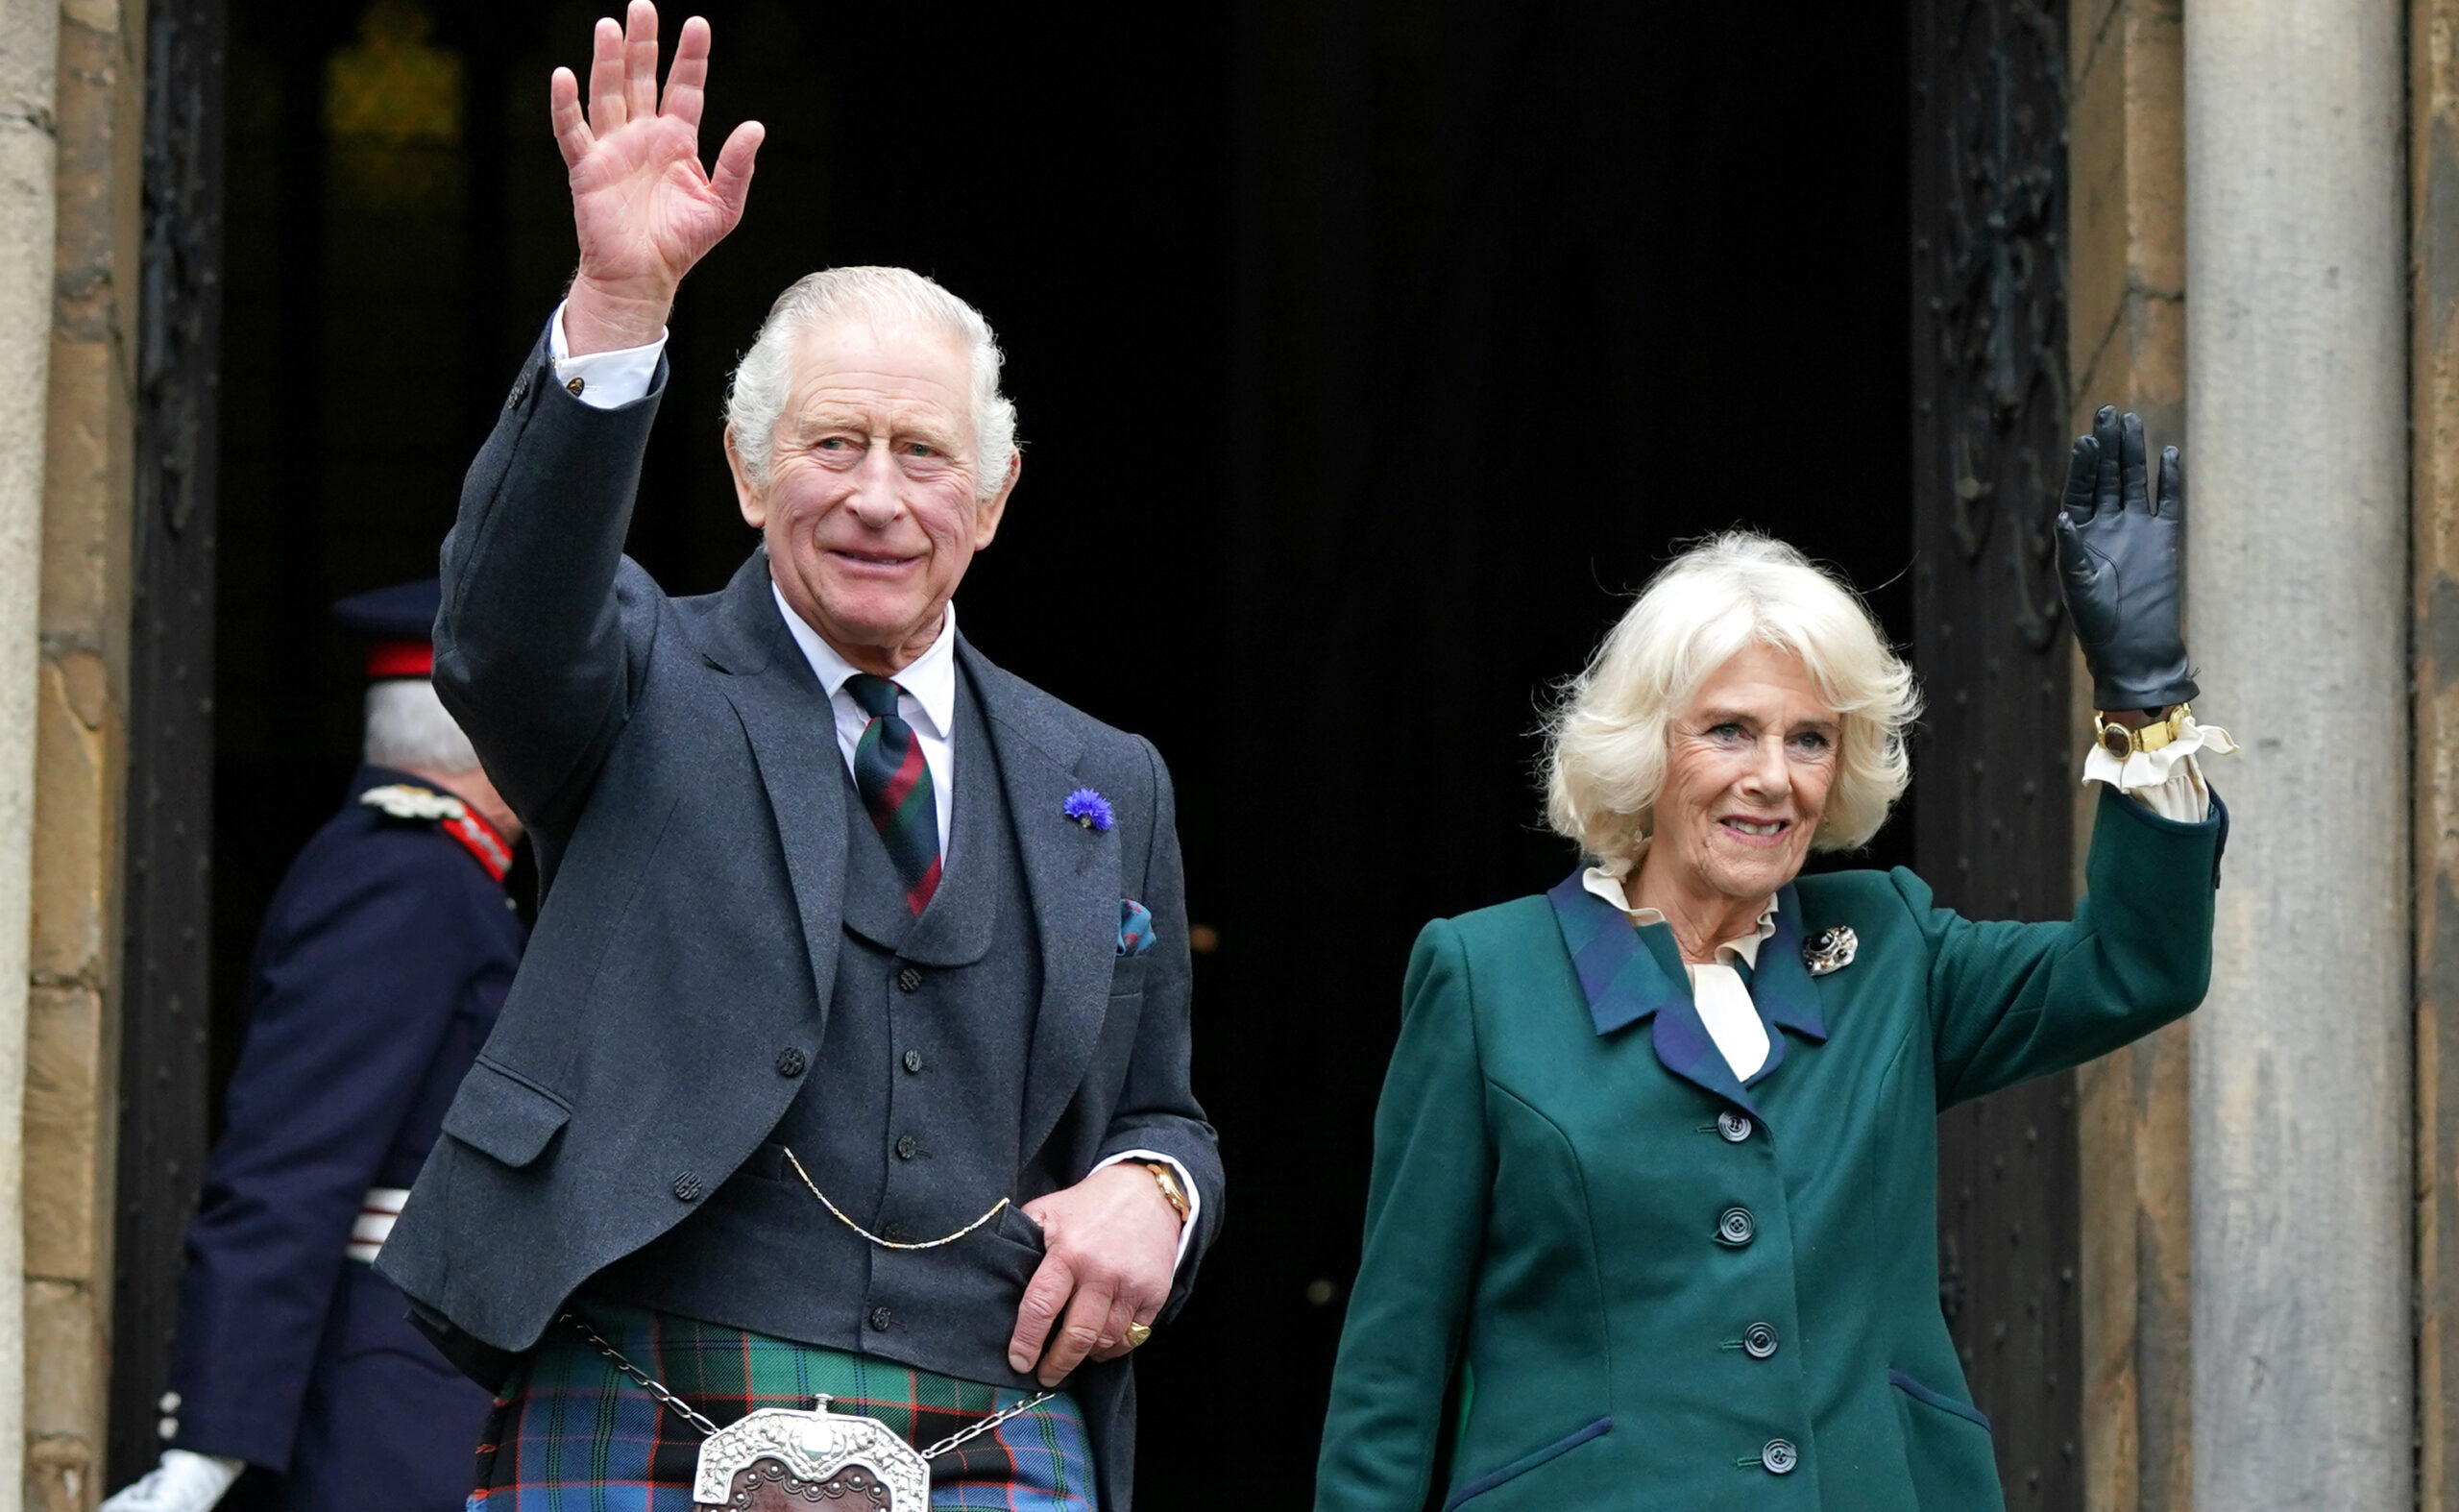 “That would gladden my dear mother’s heart”: King Charles honours the Queen’s final wishes during a royal engagement in Scotland